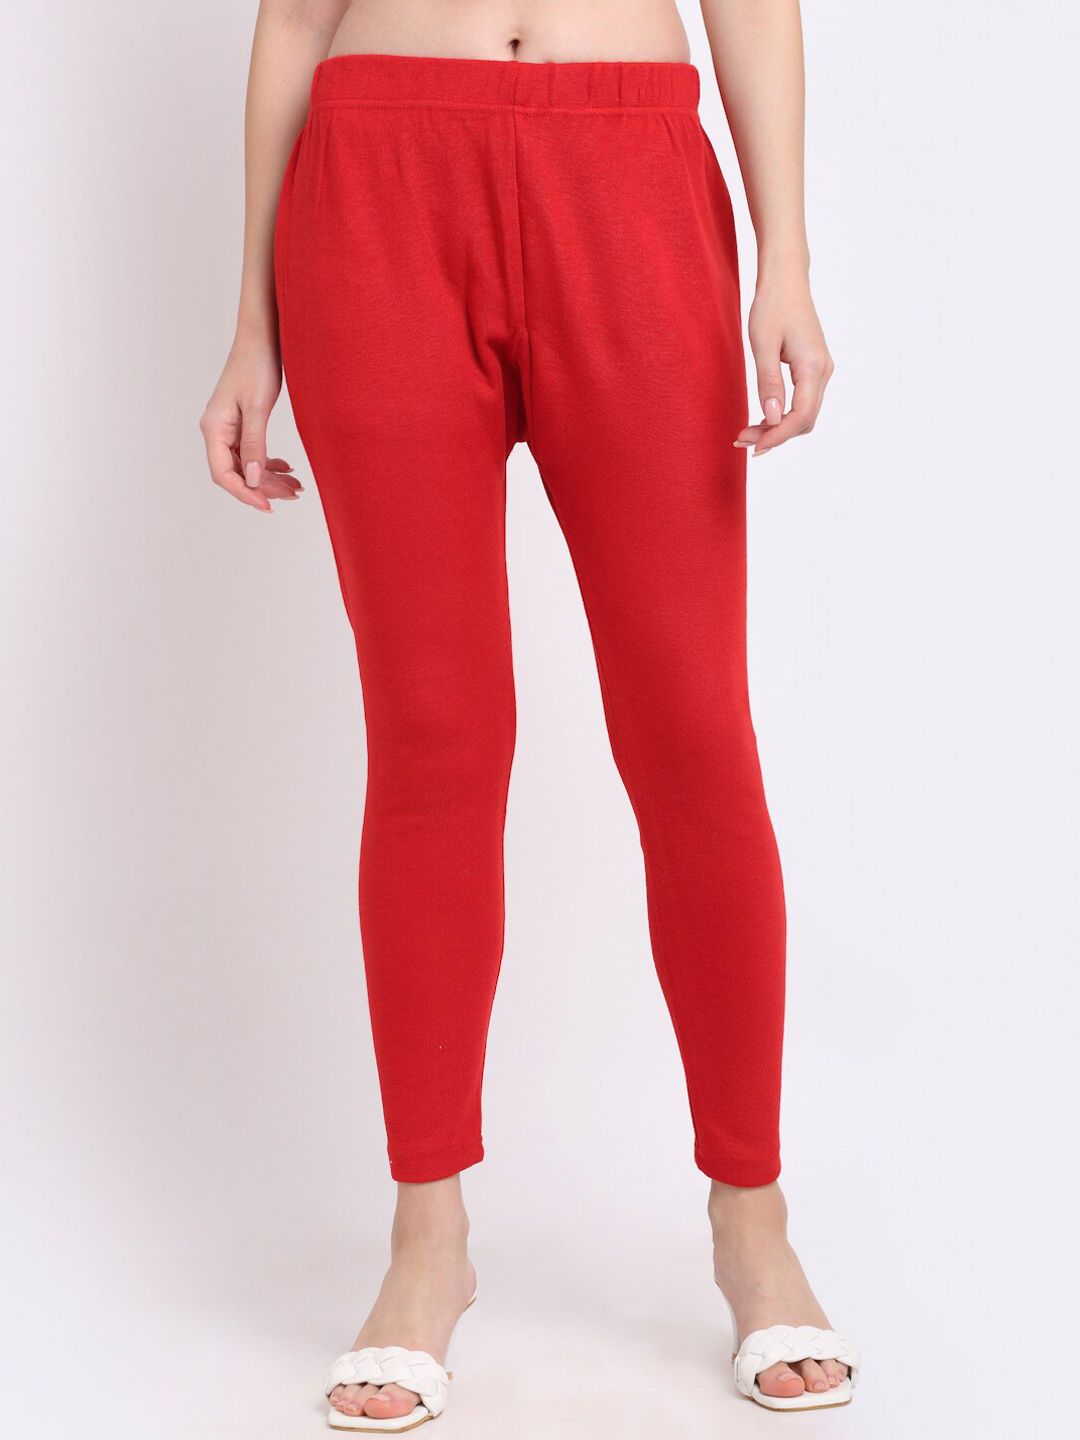 TAG 7 Women Red Woolen Ankle-Length Leggings Price in India